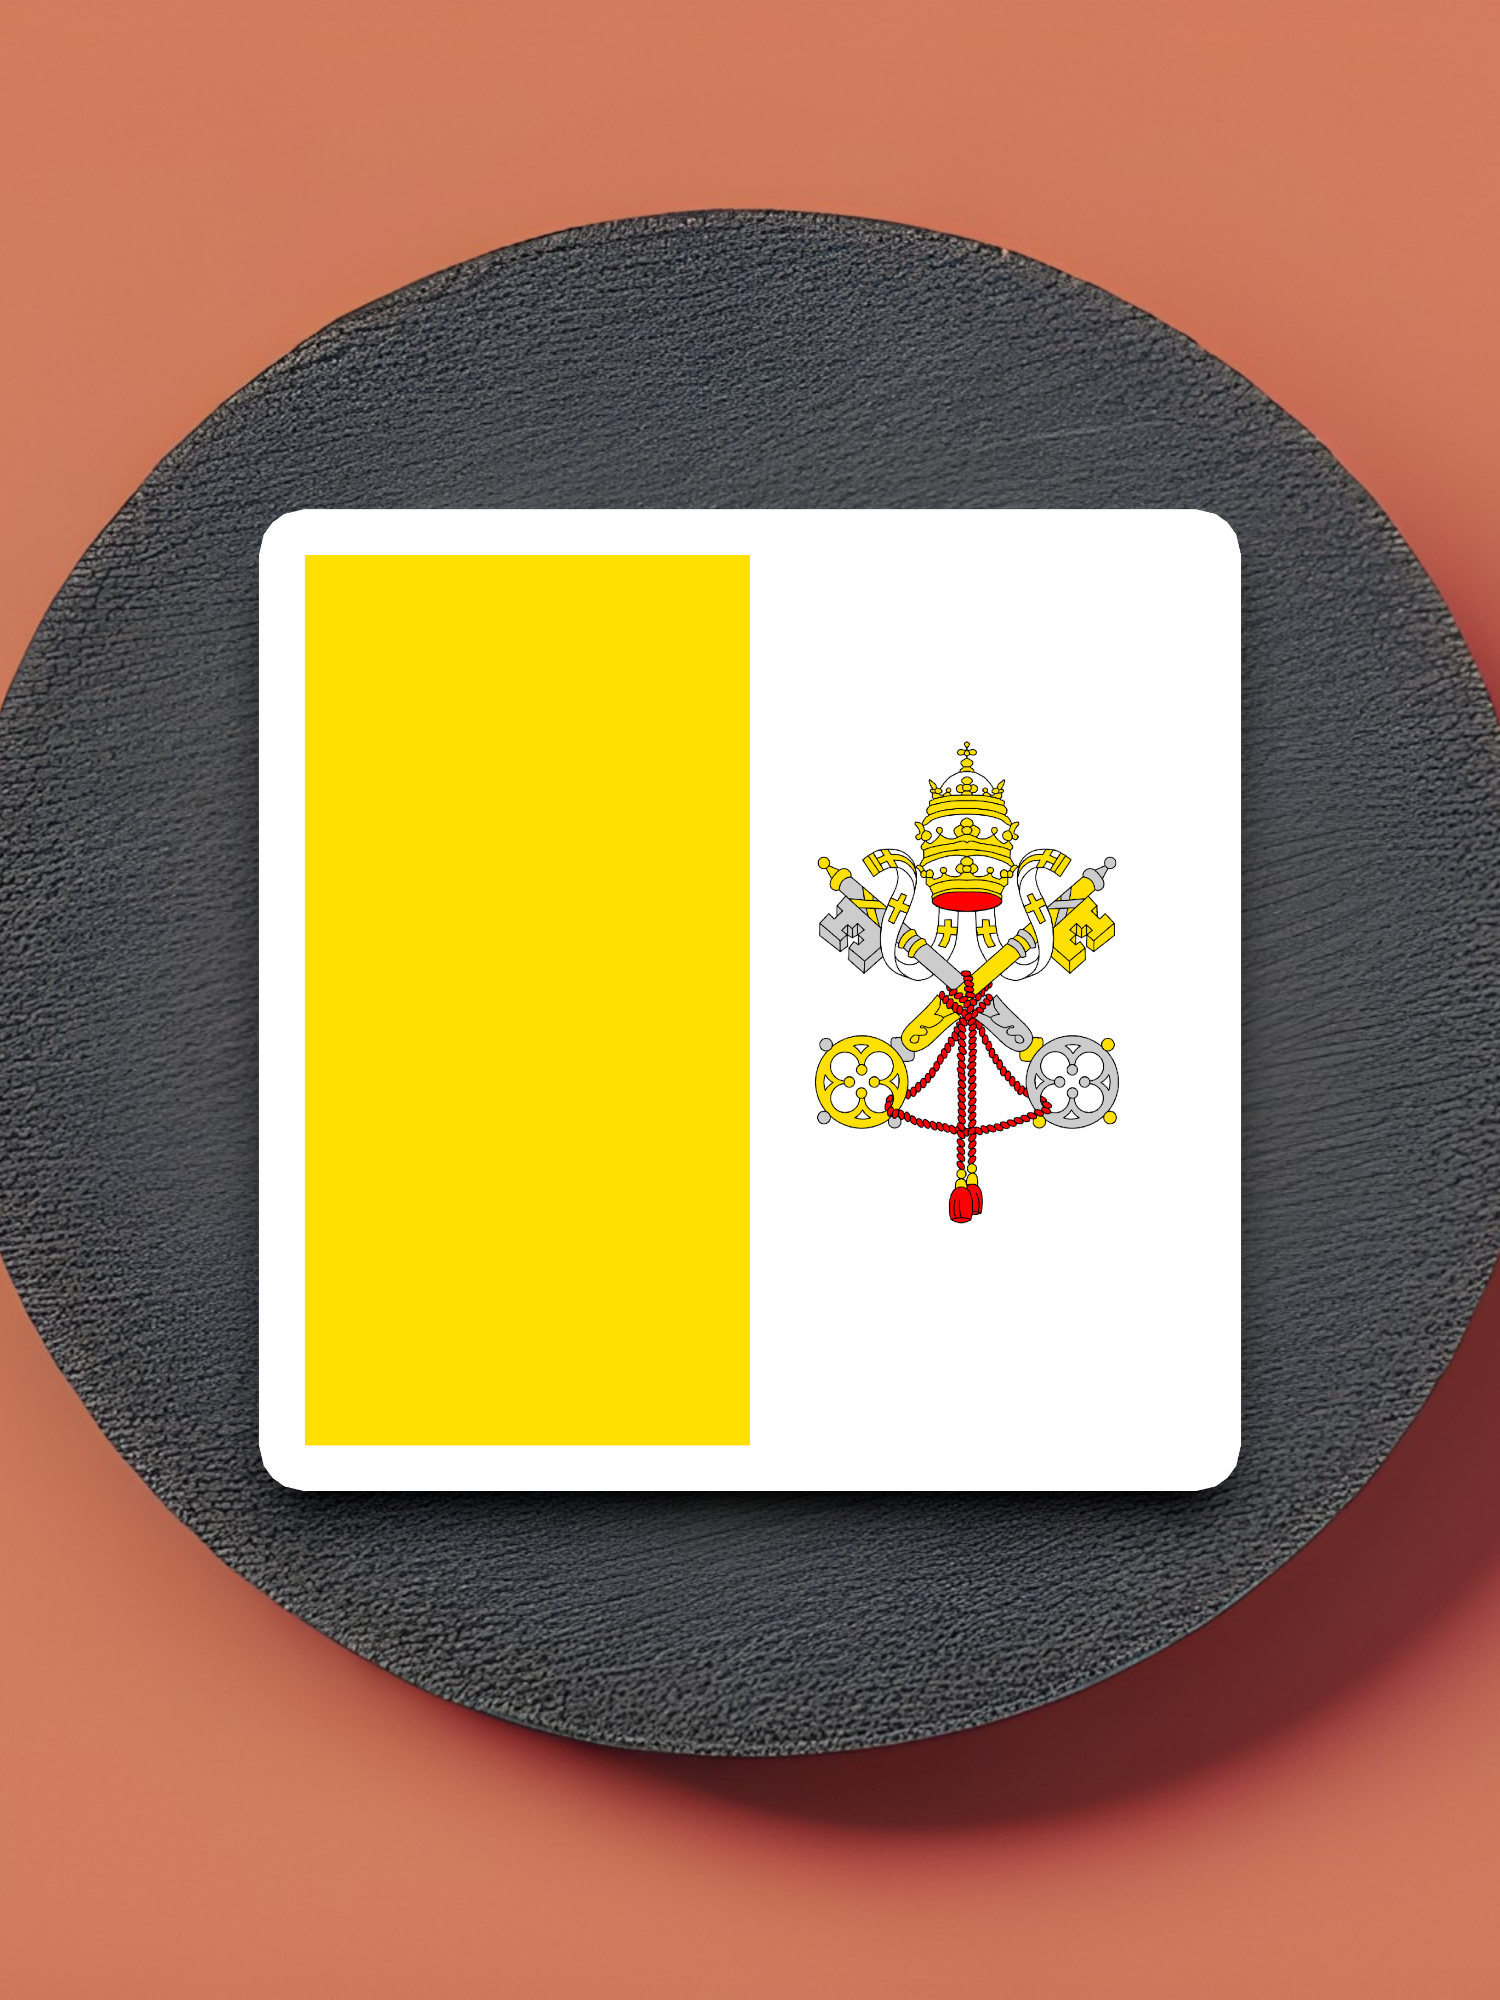 Vatican City (Holy See) Flag - International Country Flag Sticker